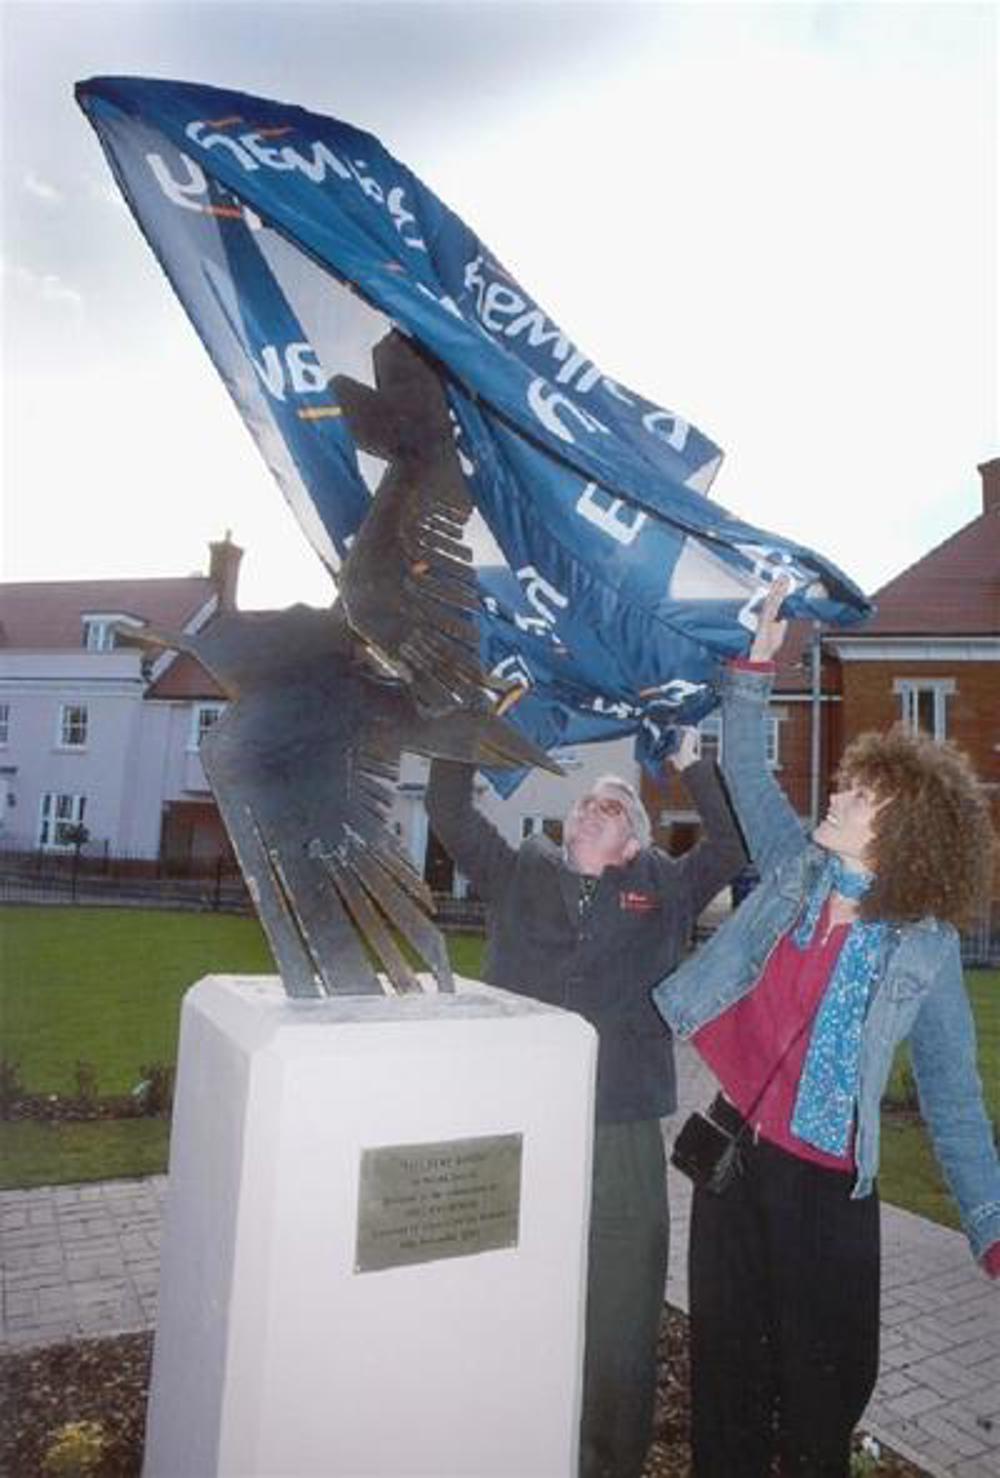 Two women unveiling a sculpture of a bird on a plinth